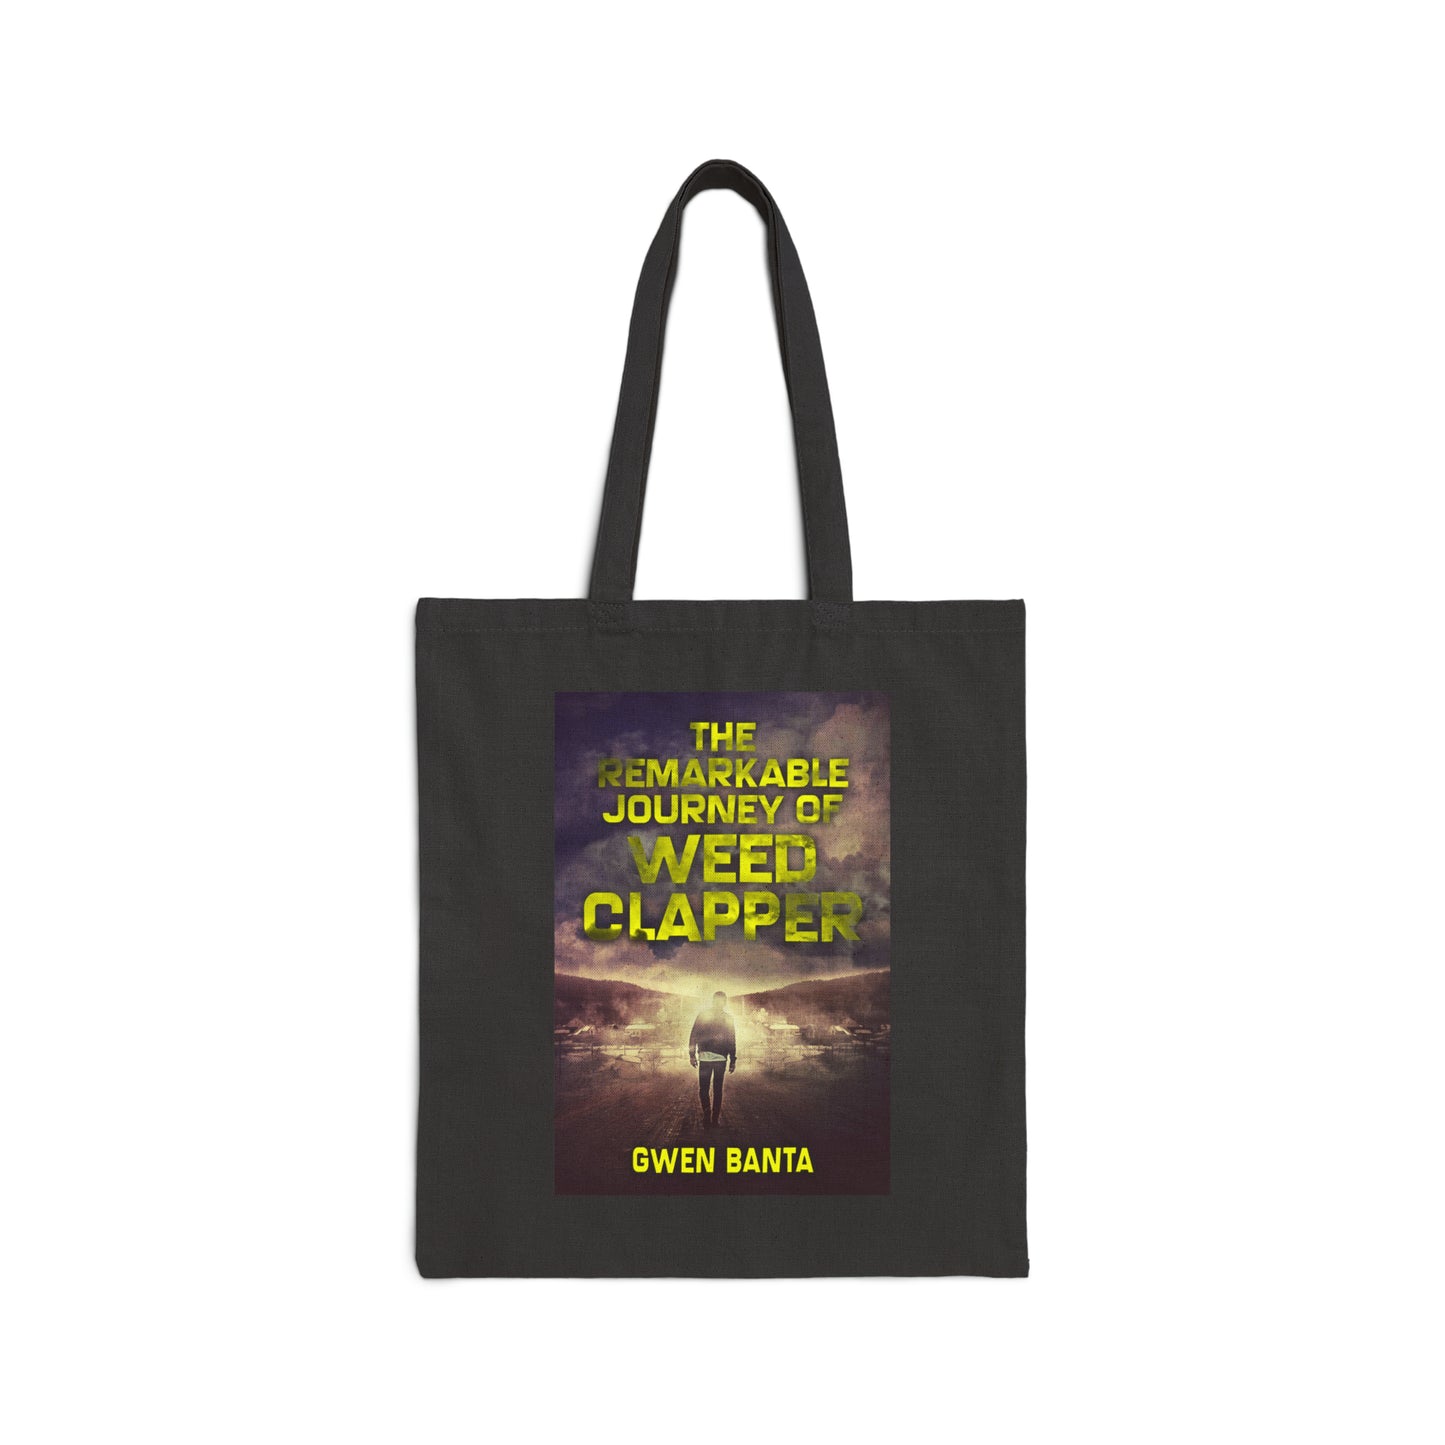 The Remarkable Journey Of Weed Clapper - Cotton Canvas Tote Bag